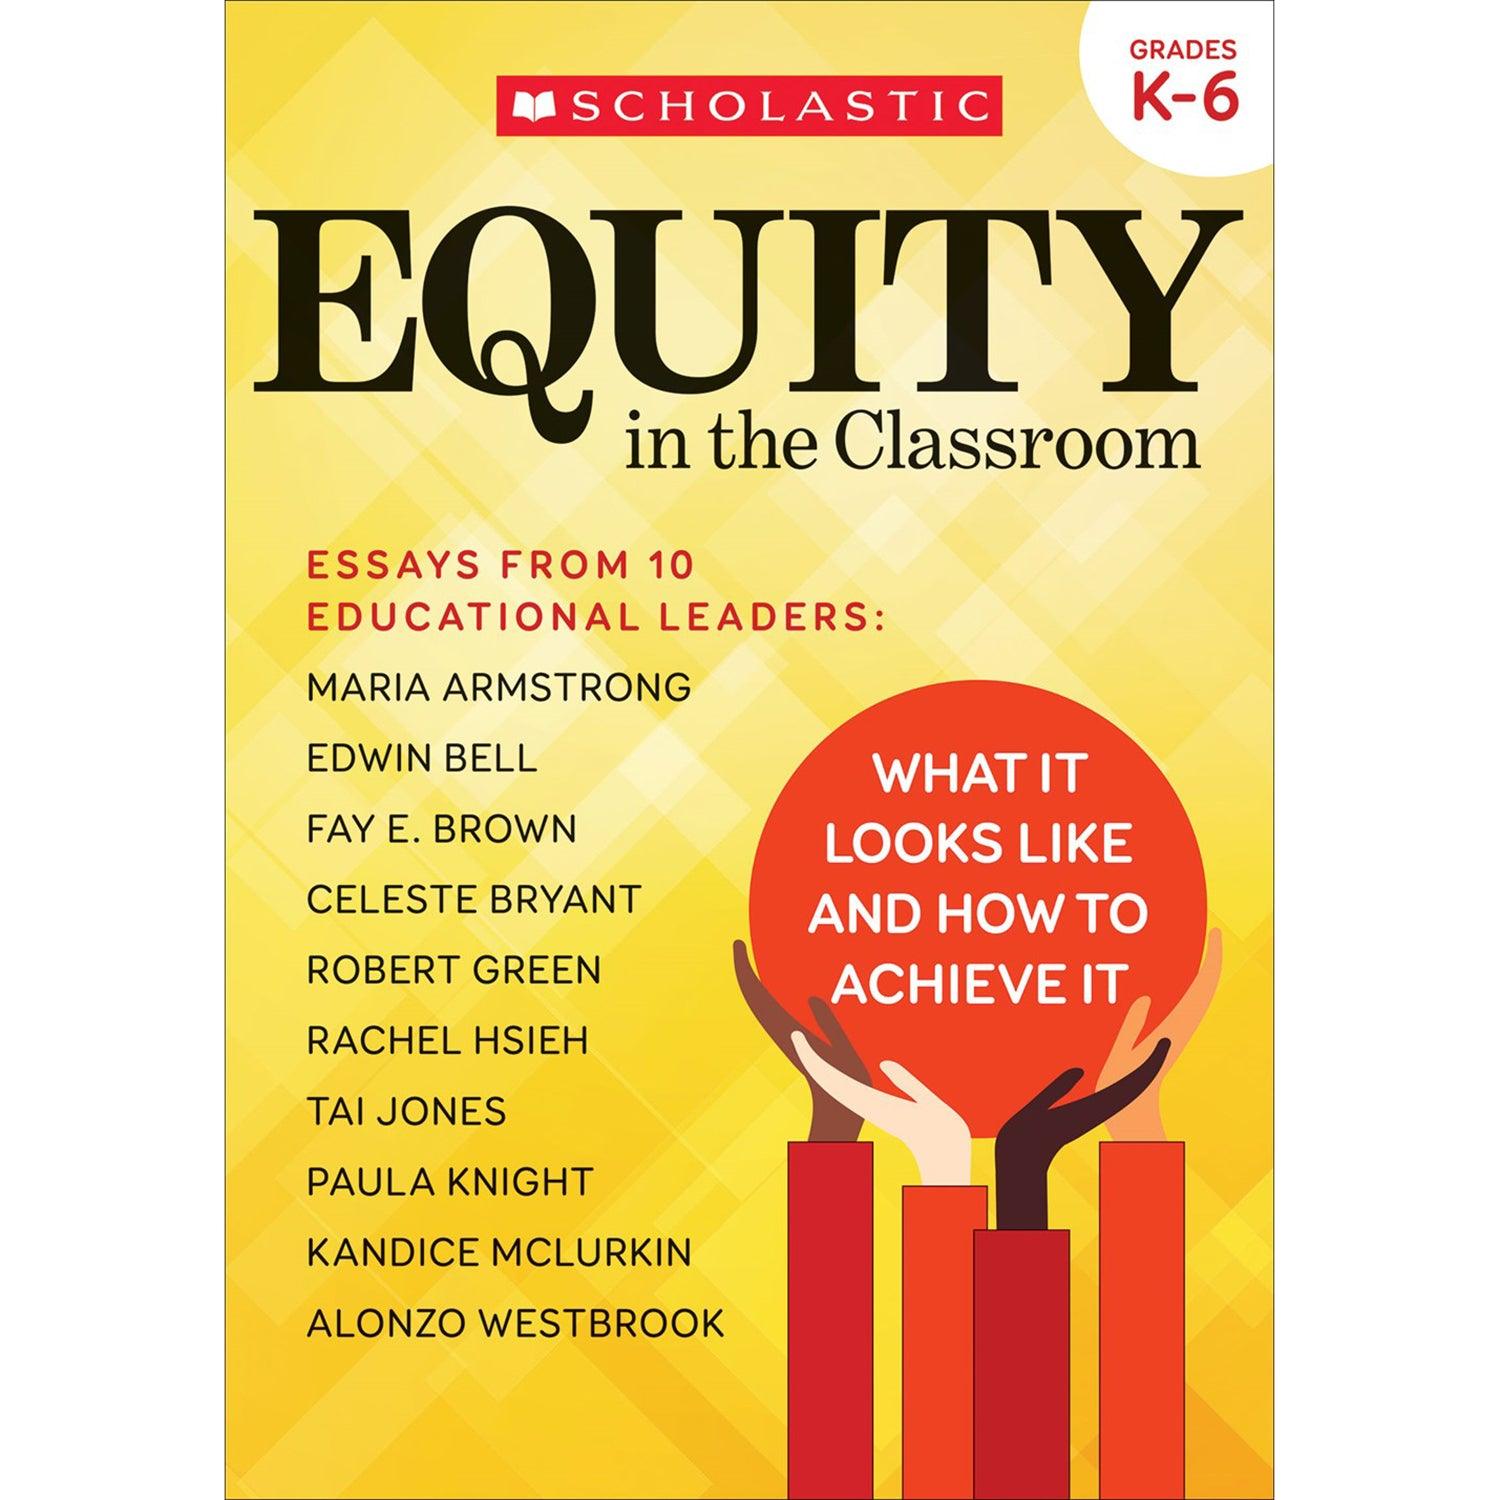 Equity in the Classroom - Loomini